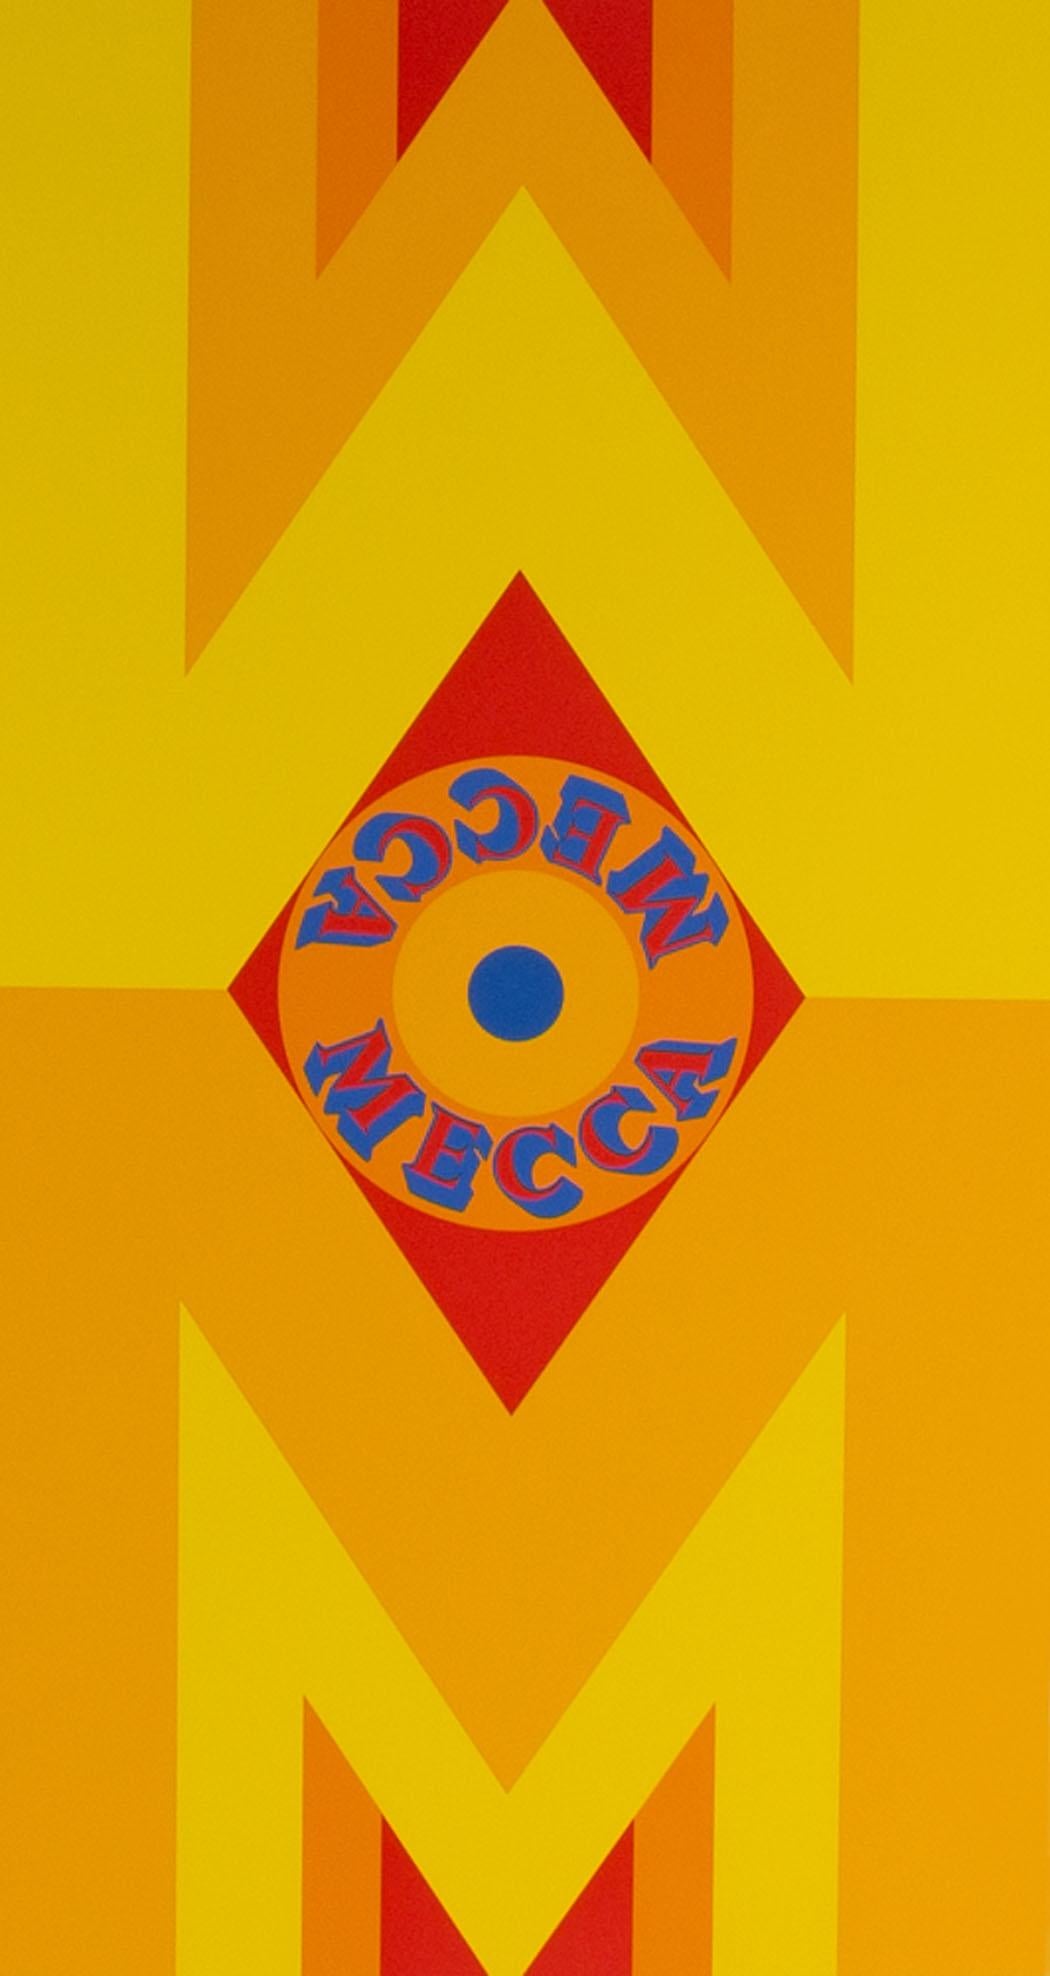 A 1977 limited edition serigraph titled Mecca I by American artist Robert Indiana (1928-2018). Printed on Arches 88 paper, this print depicts two mirrored 'M' shapes in yellow, red, and orange. The word 